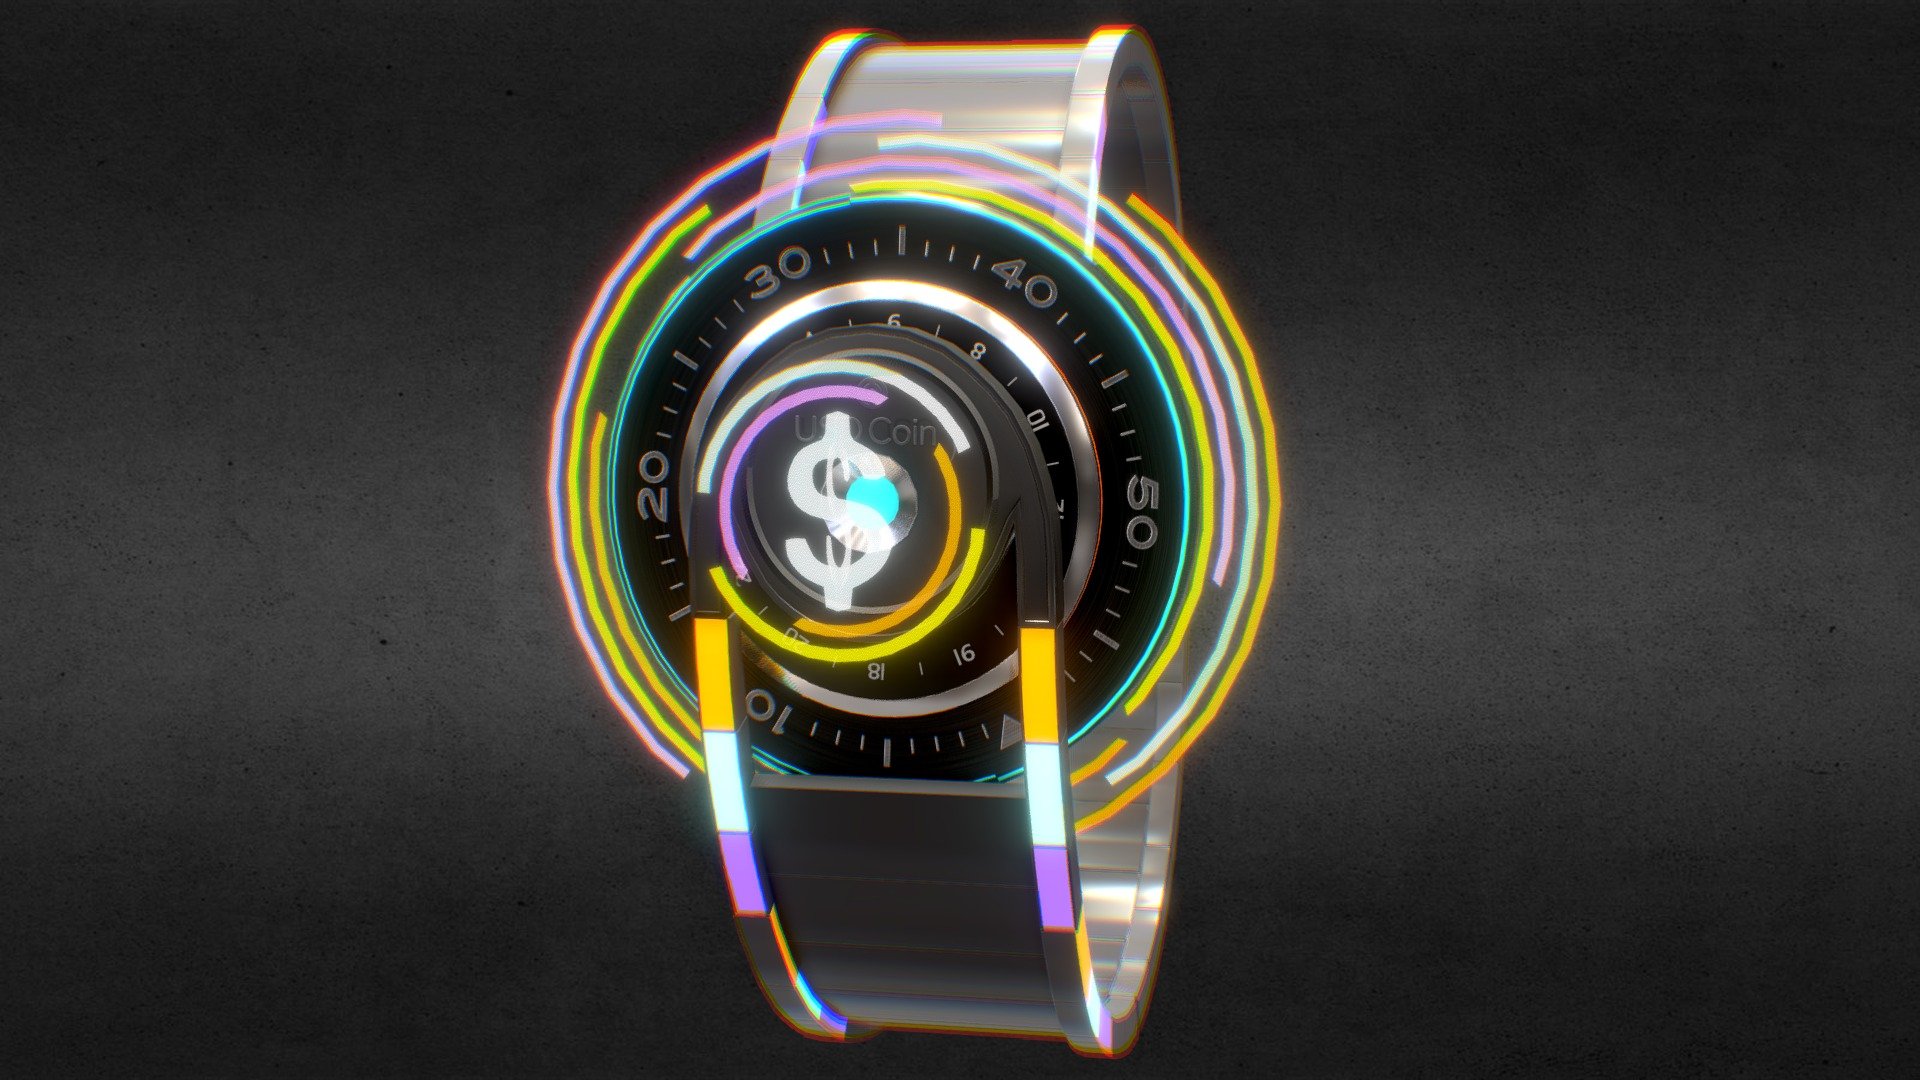 Awersome stainless steel Internet USD Coin Watch.

Currently available for download in FBX format.

3D model developed by AR-Watches 3d model